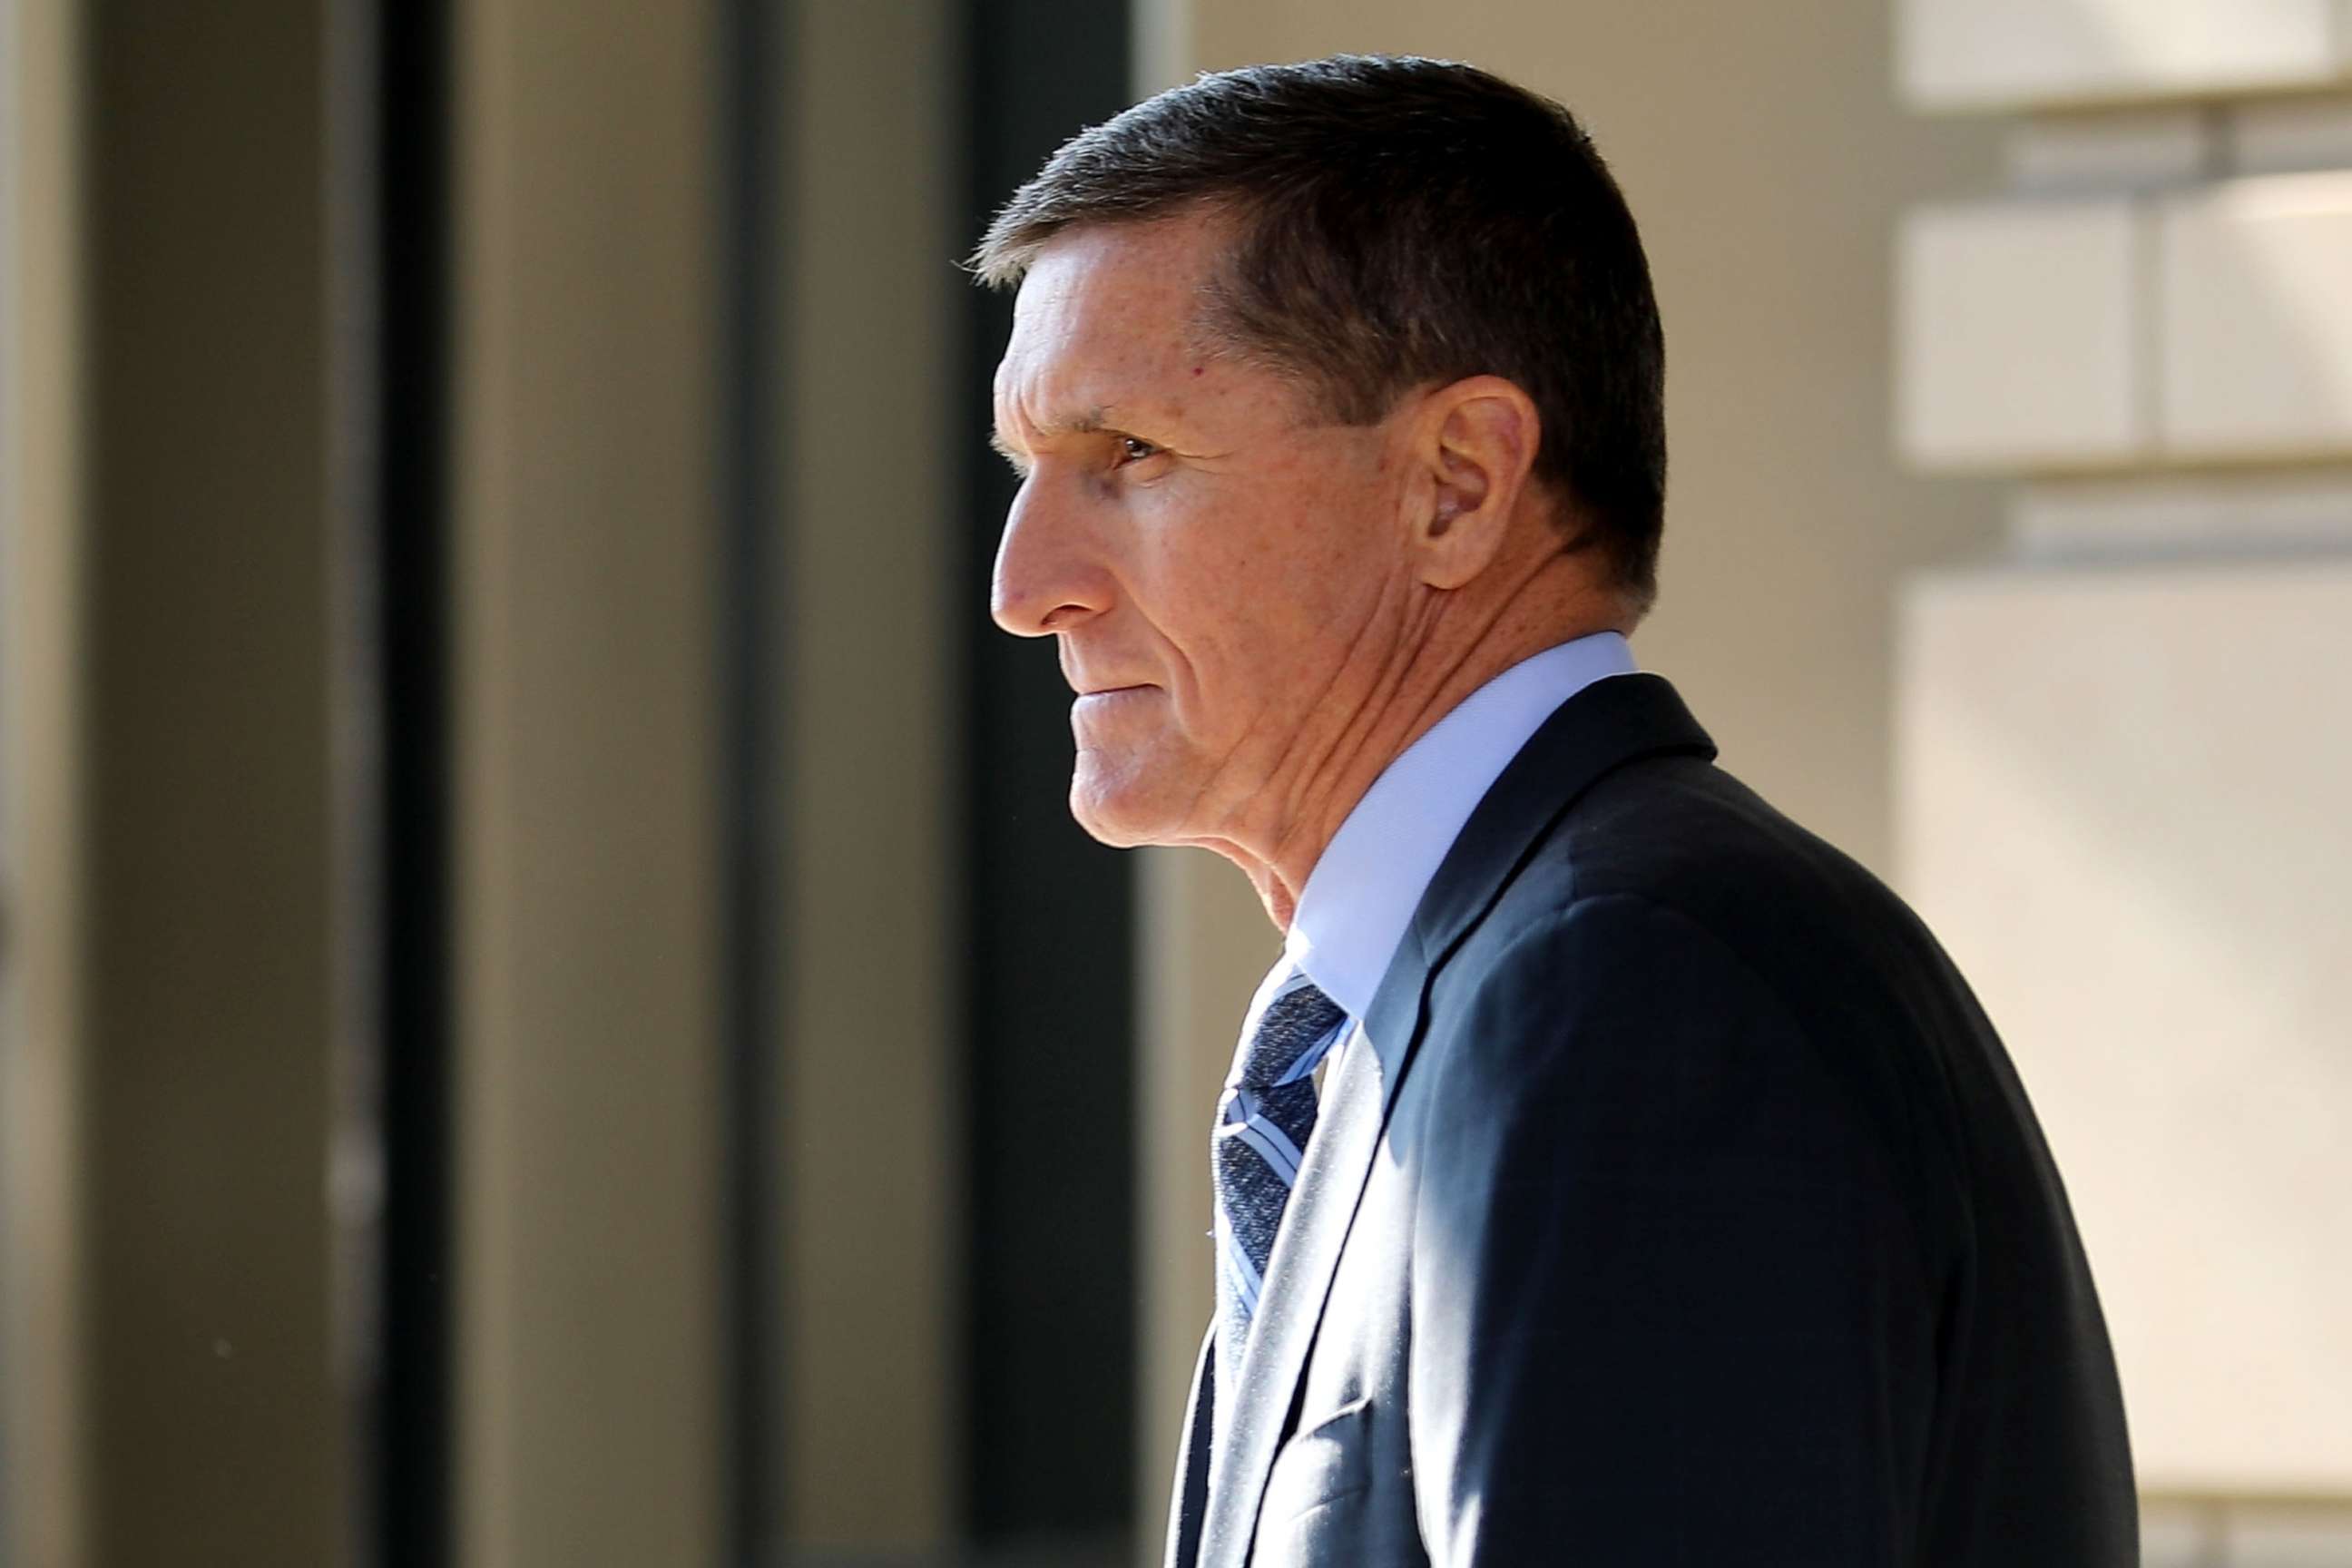 PHOTO: Michael Flynn, former national security adviser to President Donald Trump, leaves following his plea hearing at the Prettyman Federal Courthouse Dec. 1, 2017 in Washington.